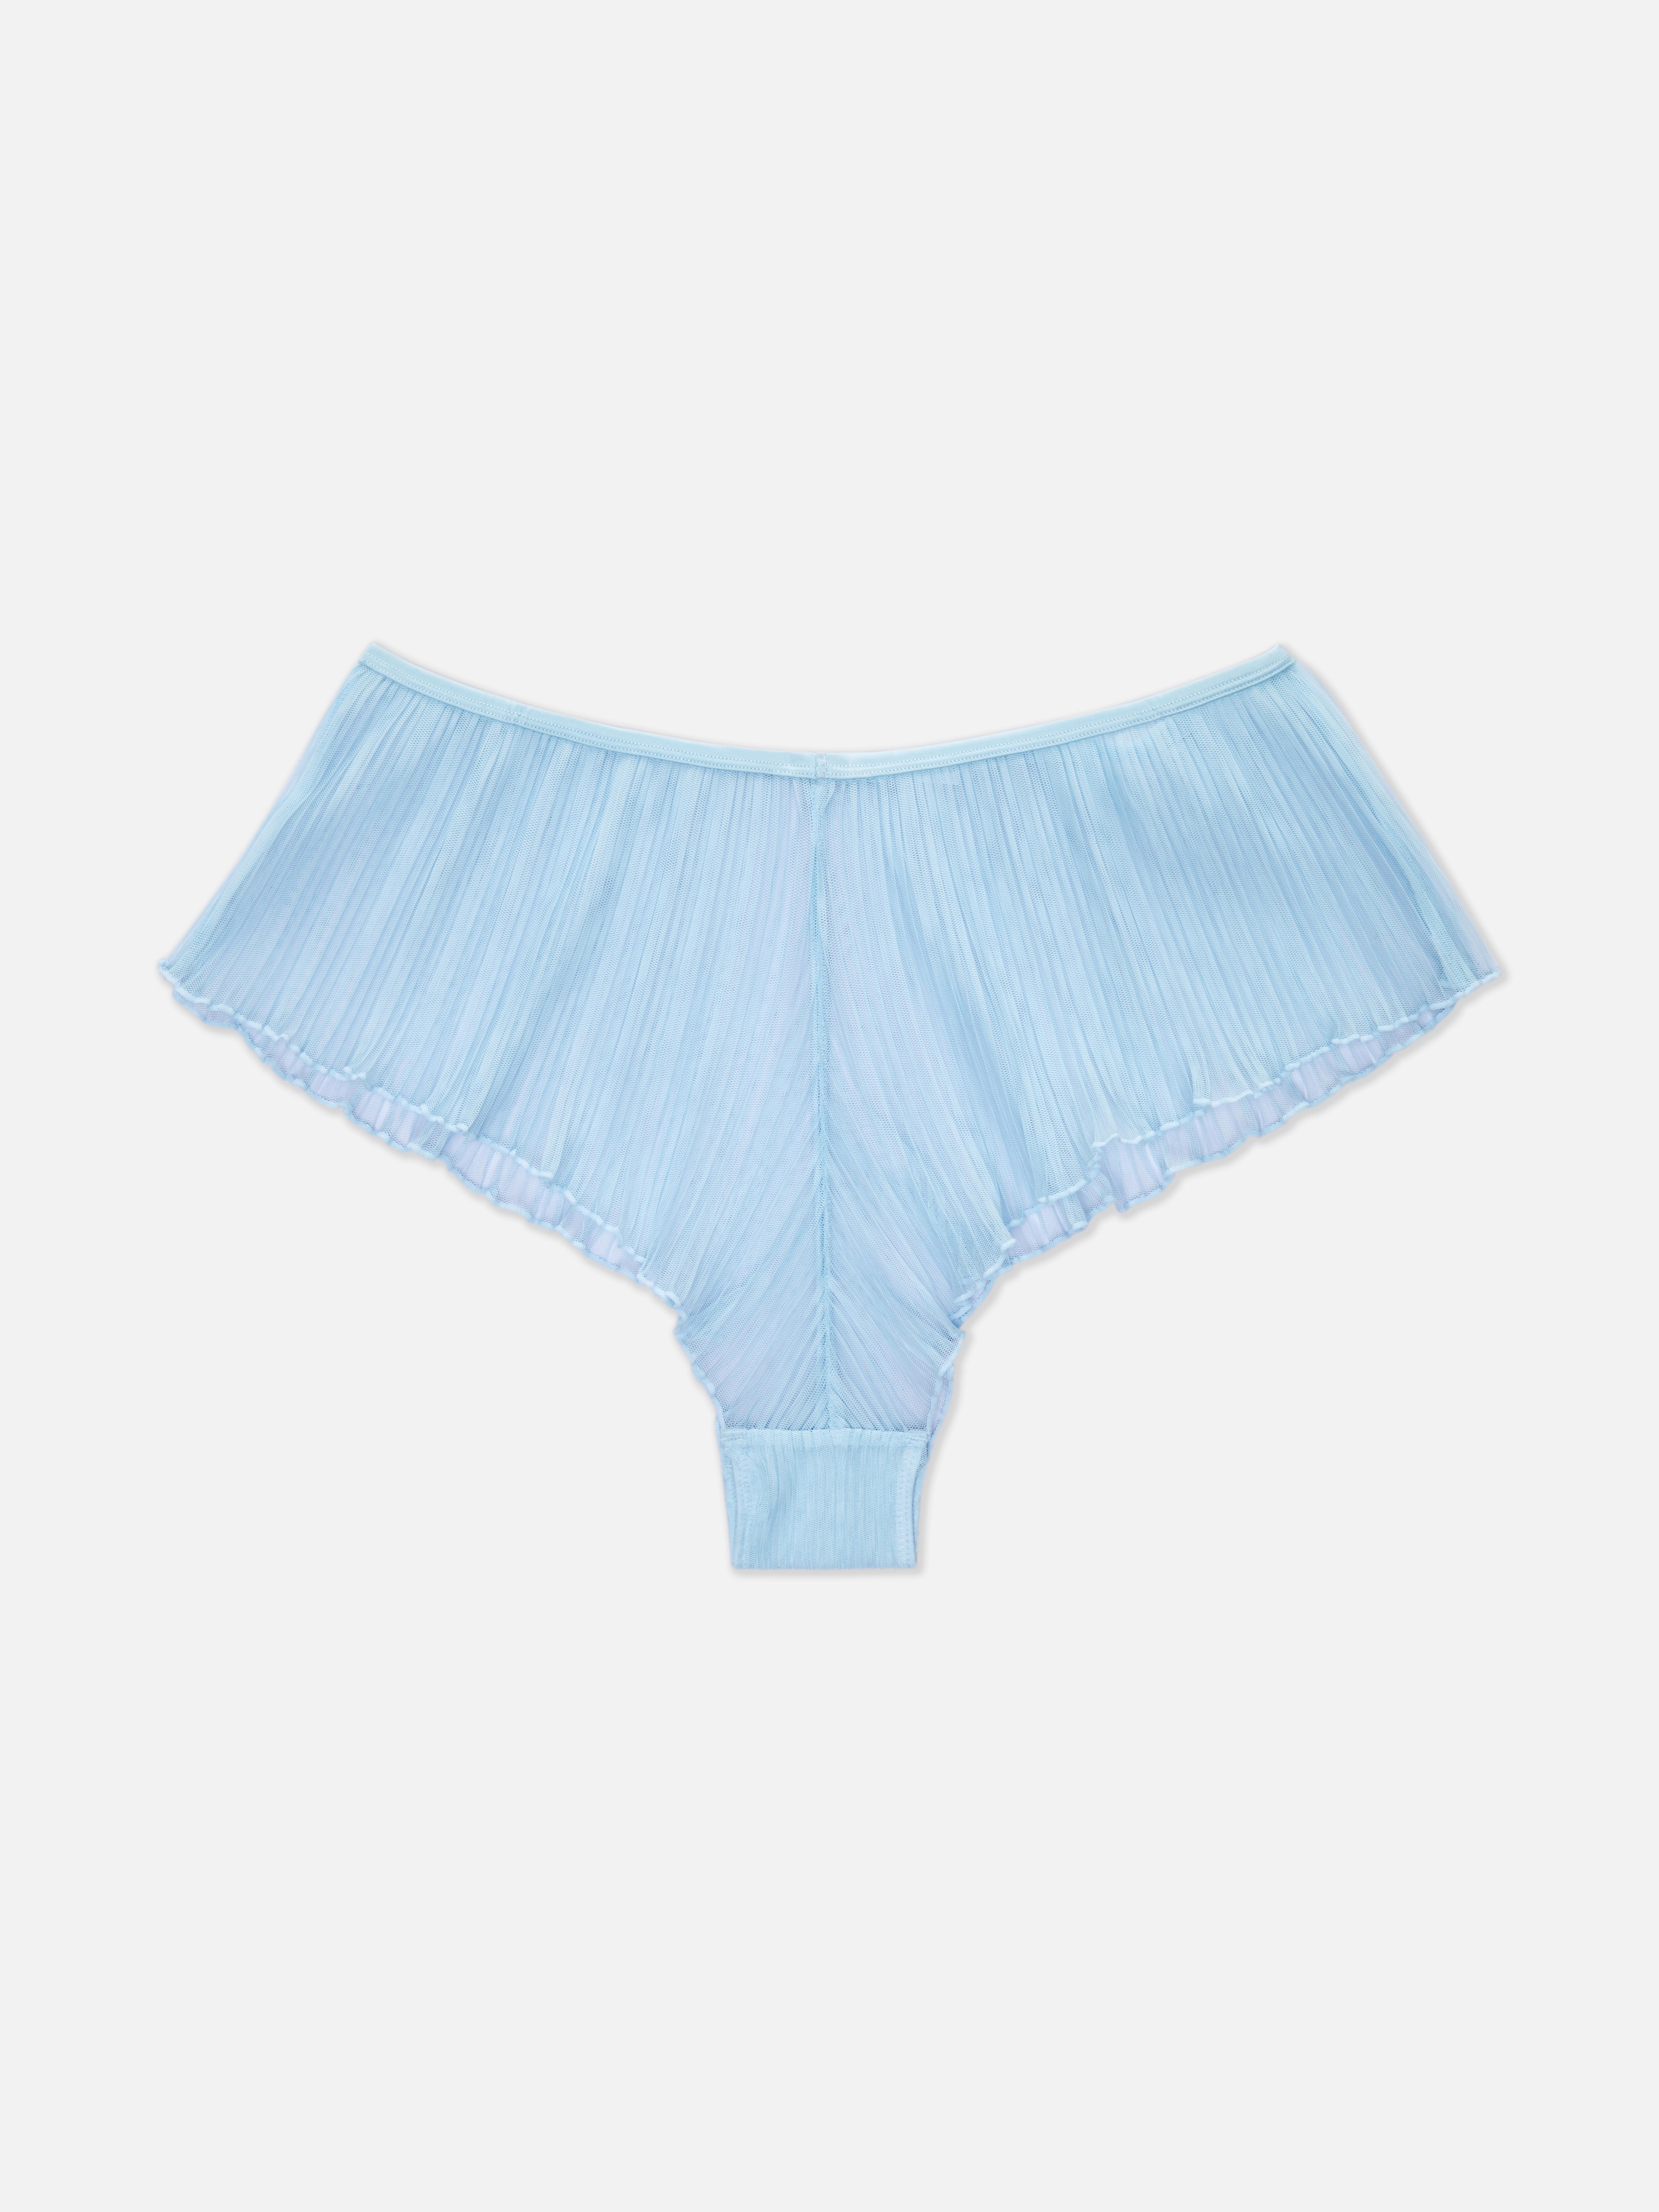 Co-ord Floaty French Knicker Briefs